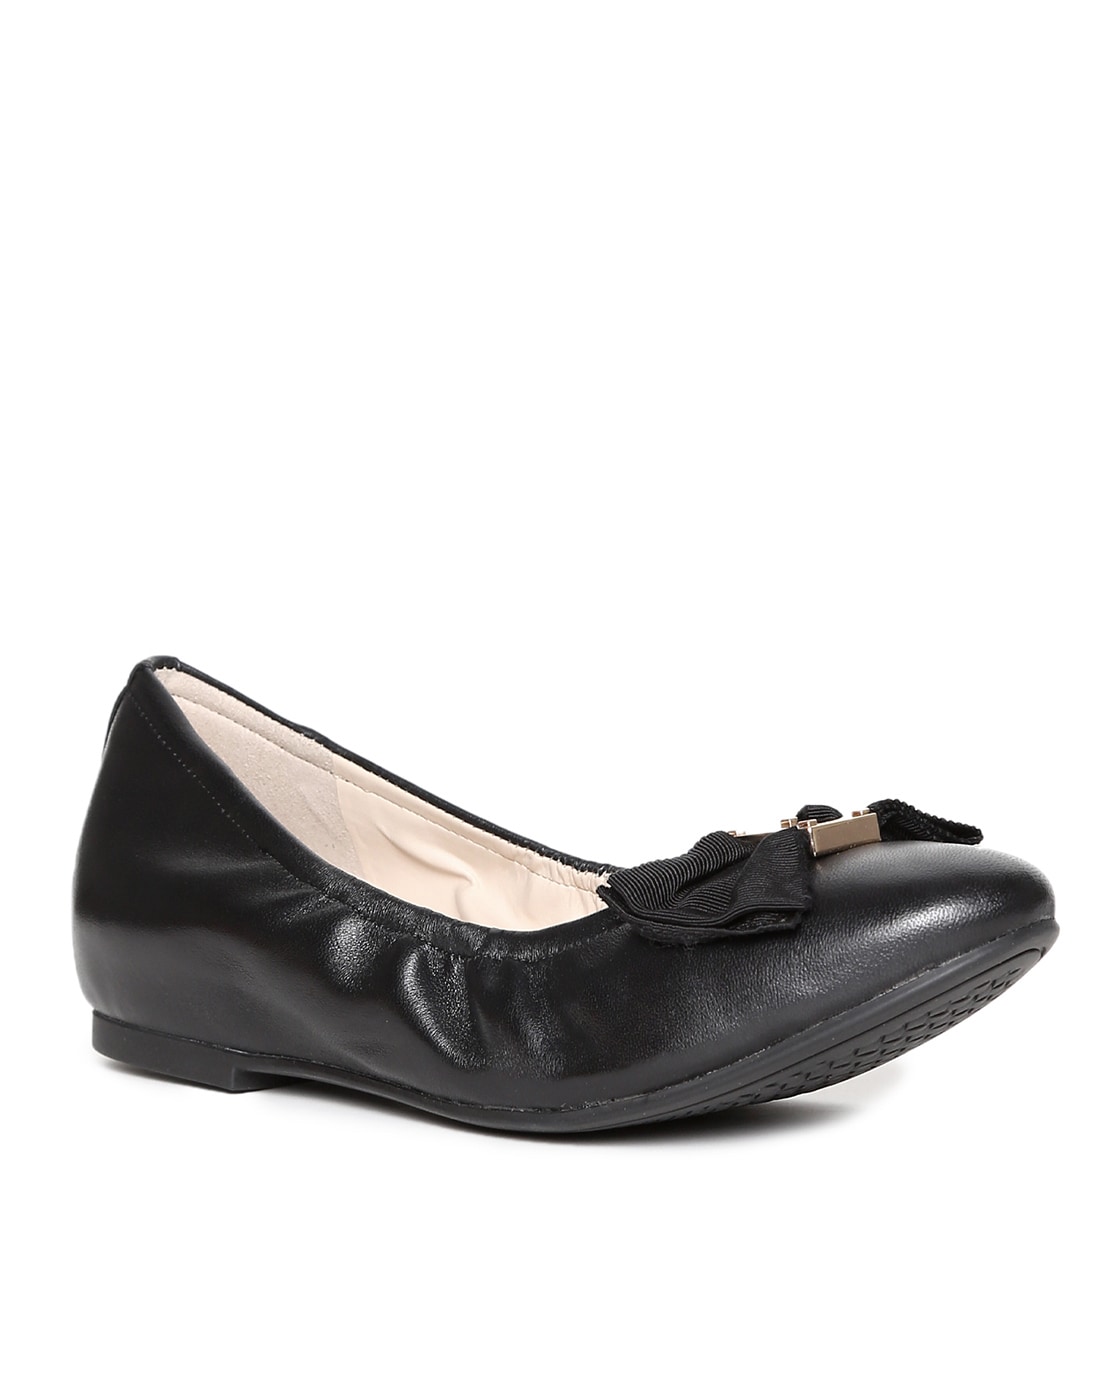 cole haan flat shoes